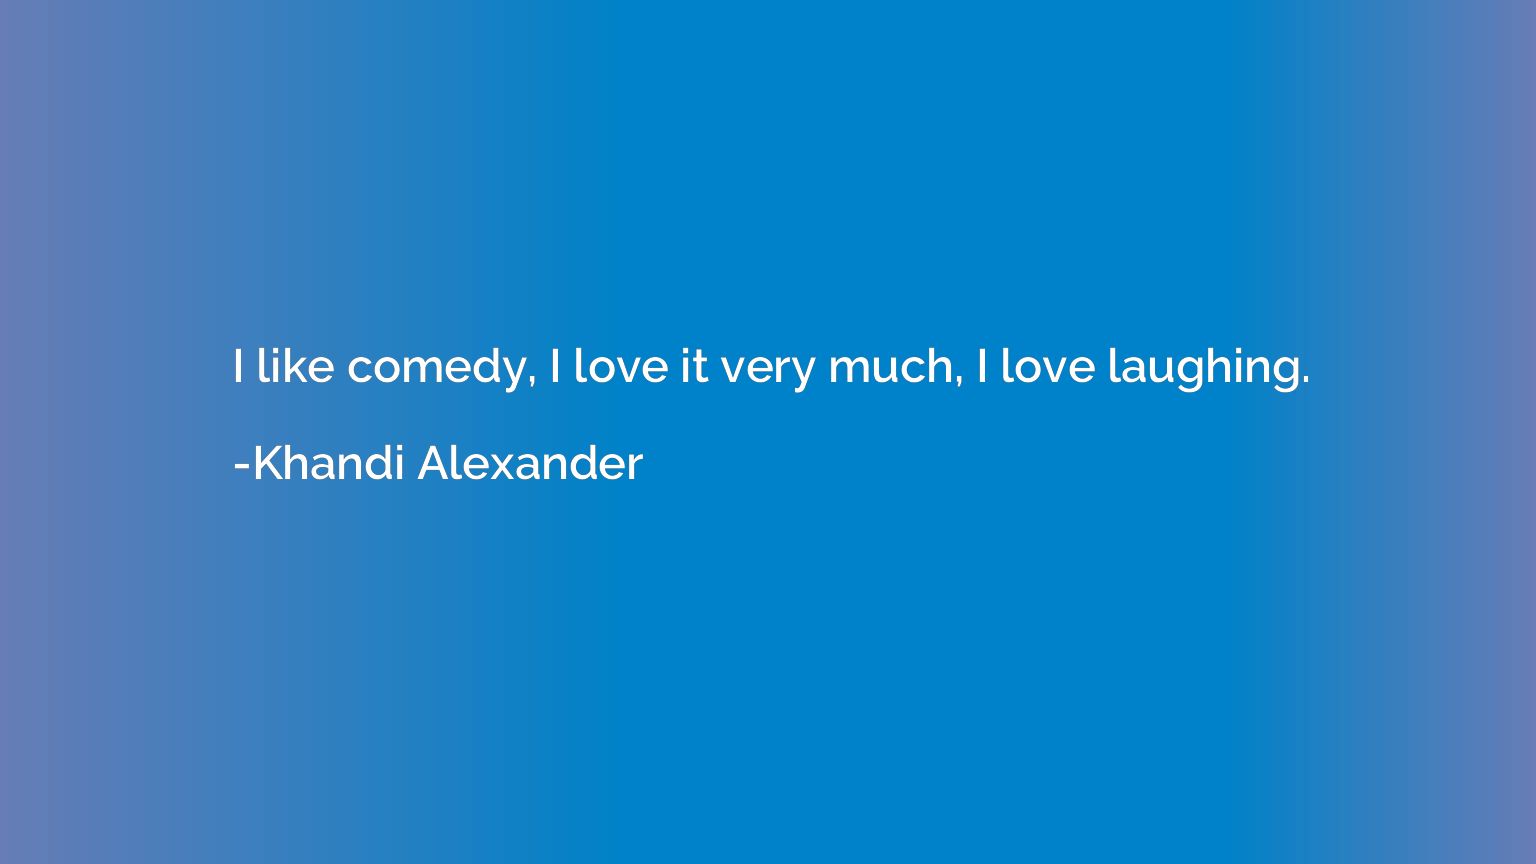 I like comedy, I love it very much, I love laughing.